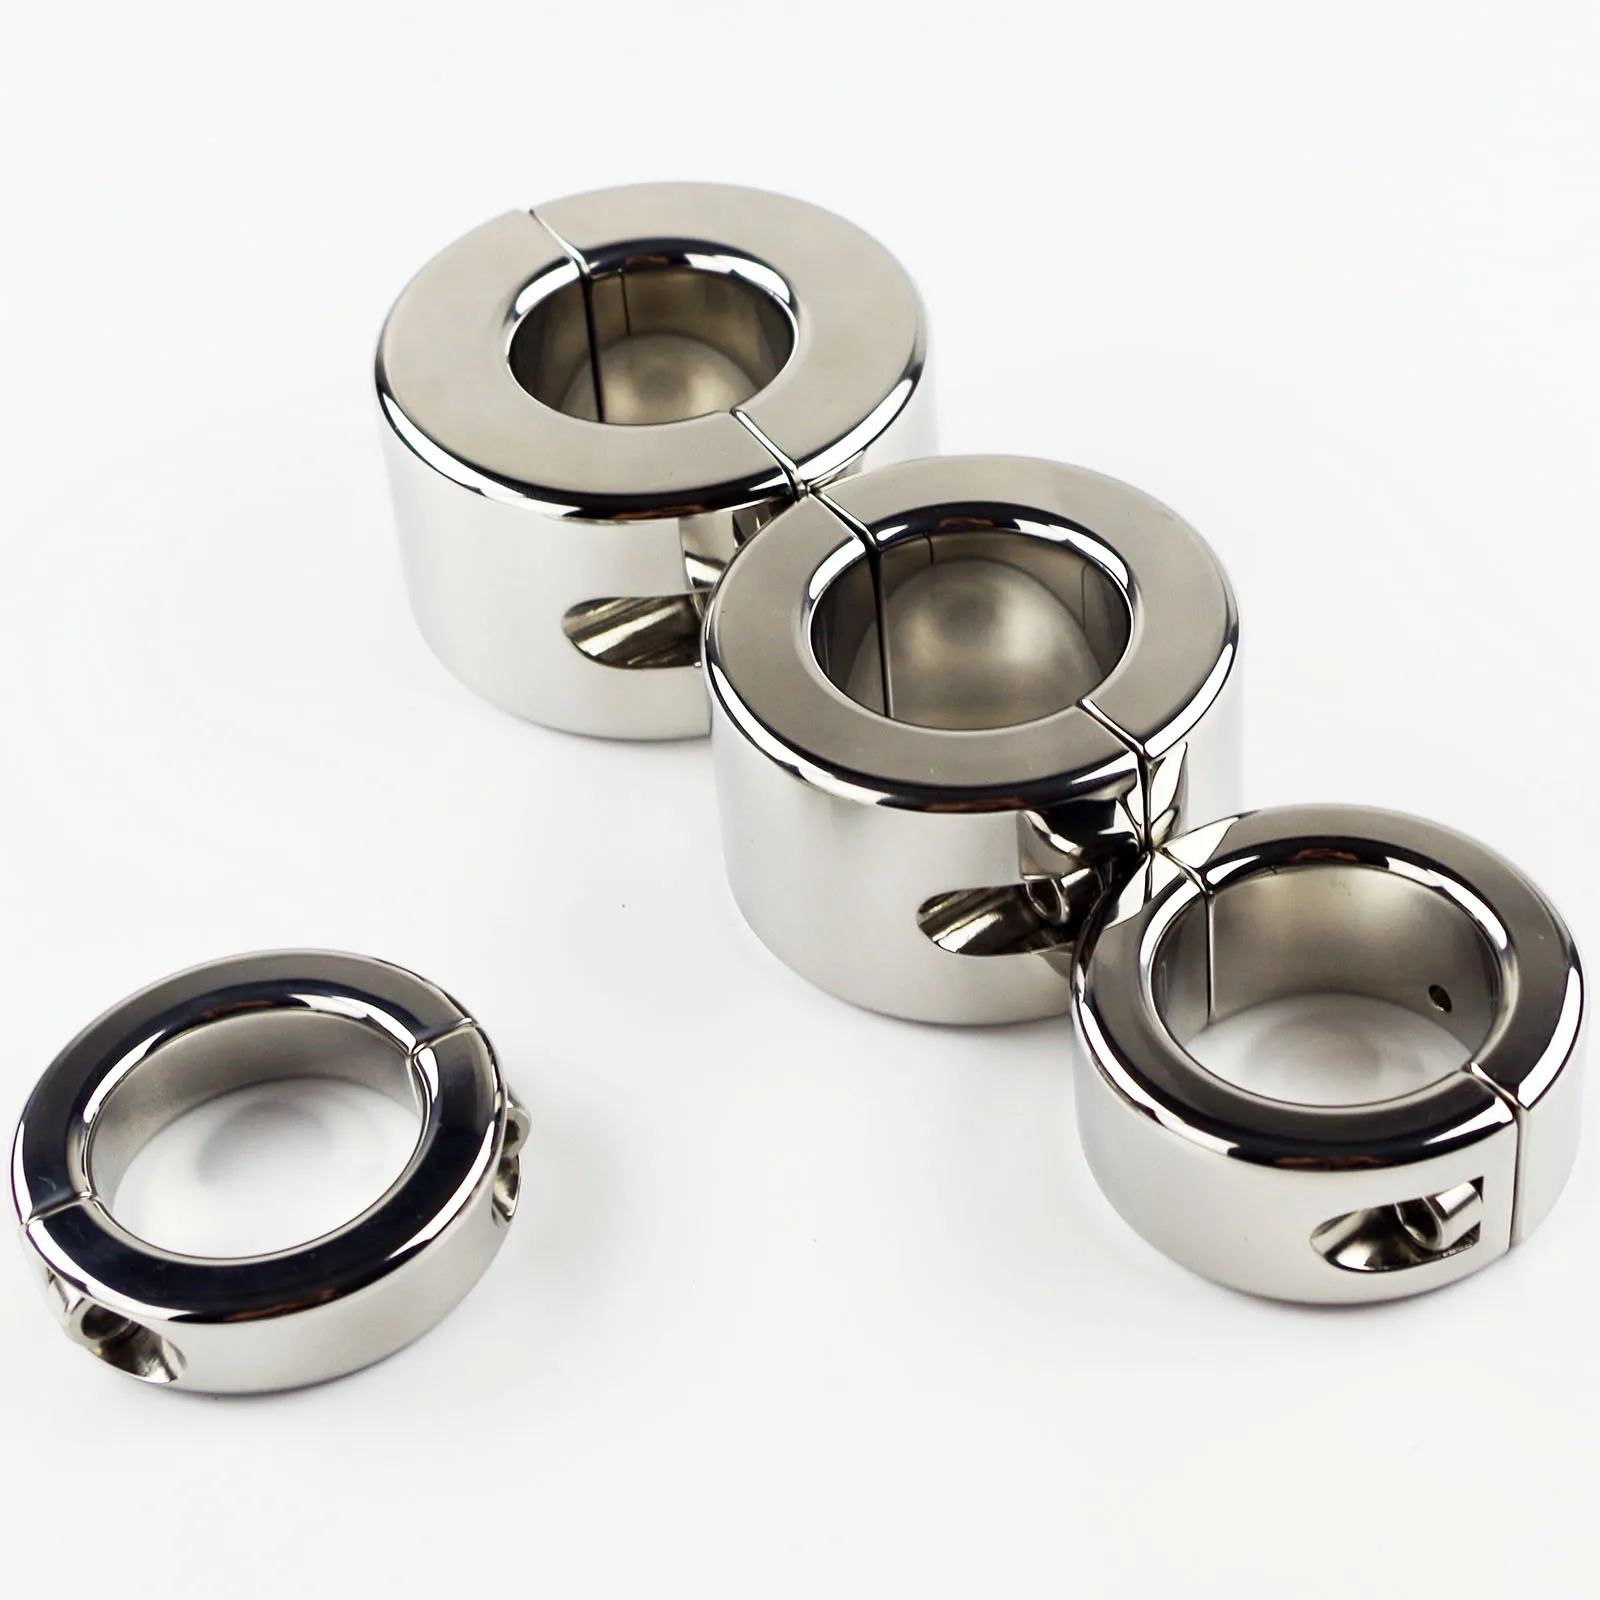 Ball Stretcher - Heavy Weight Solid Stainless Steel CBT Device